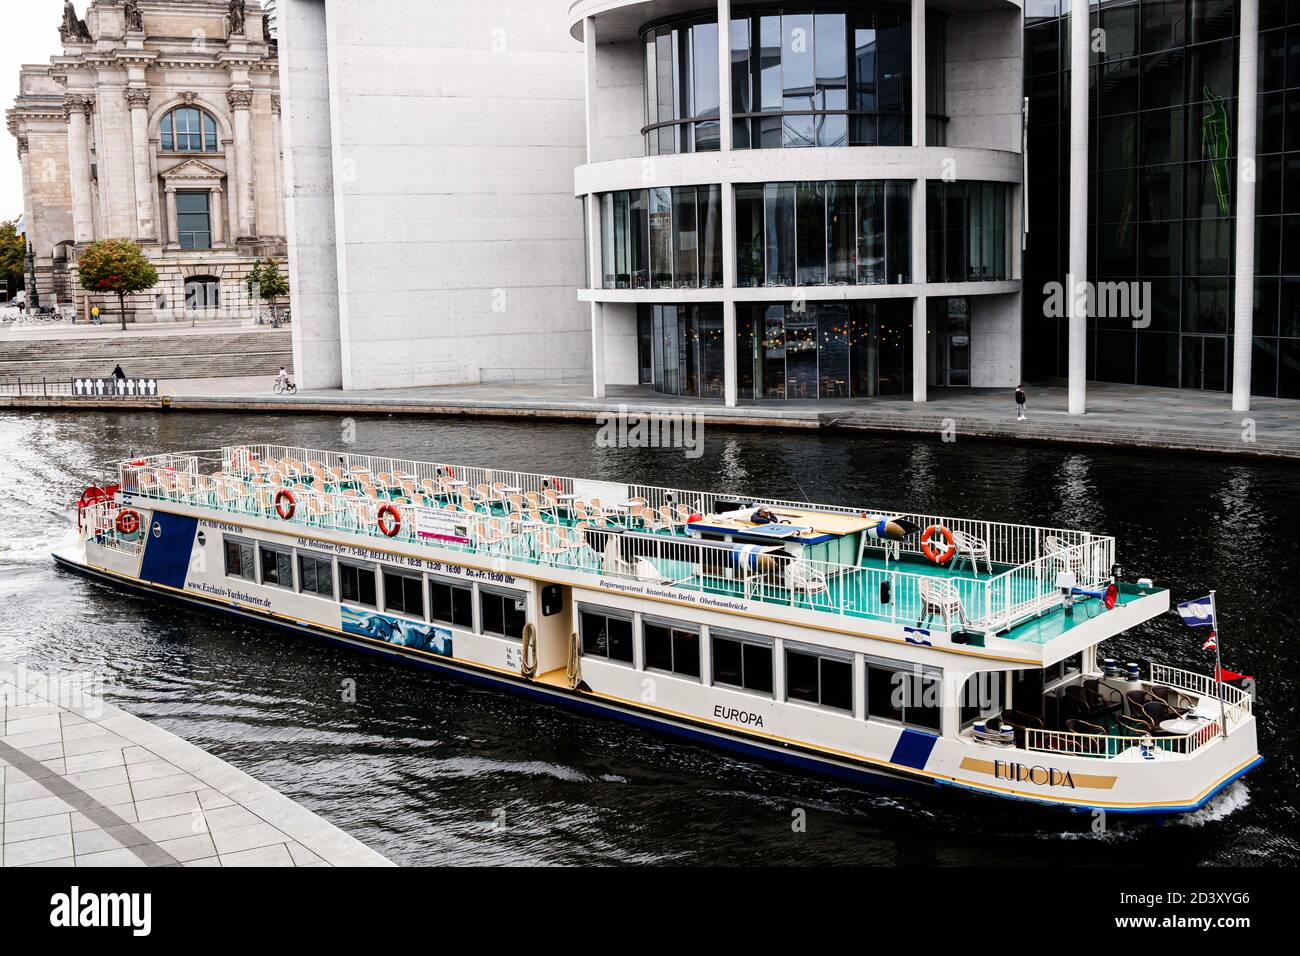 Berlin, Germany. 8th Oct, 2020. A vessel without tourists on the deck sails on the Spree River in Berlin, capital of Germany, on Oct. 8, 2020. New COVID-19 infections in Germany rose sharply and increased by 4,058 within one day to a total of 310,144, the Robert Koch Institute (RKI) said on Thursday. Credit: Binh Truong/Xinhua/Alamy Live News Stock Photo